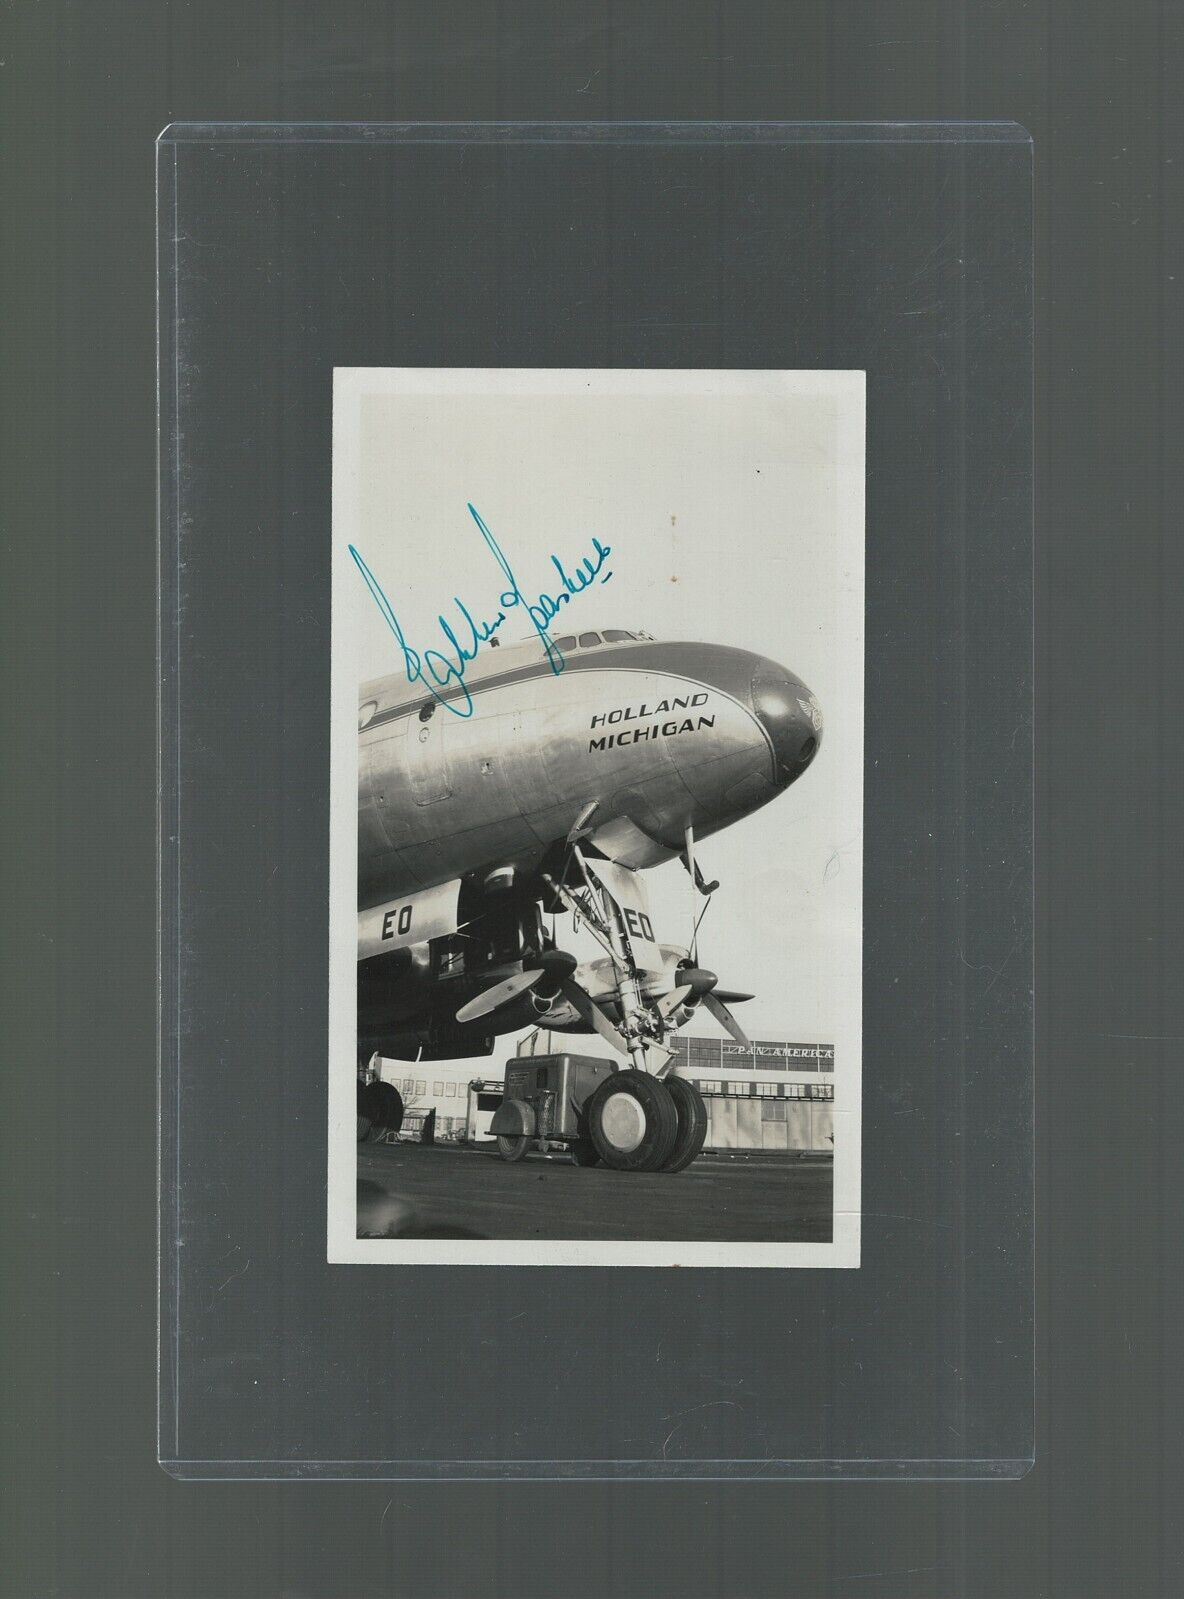 1947 KLM Photo Holland Michigan USA to Holland Netherlands signed by Captain